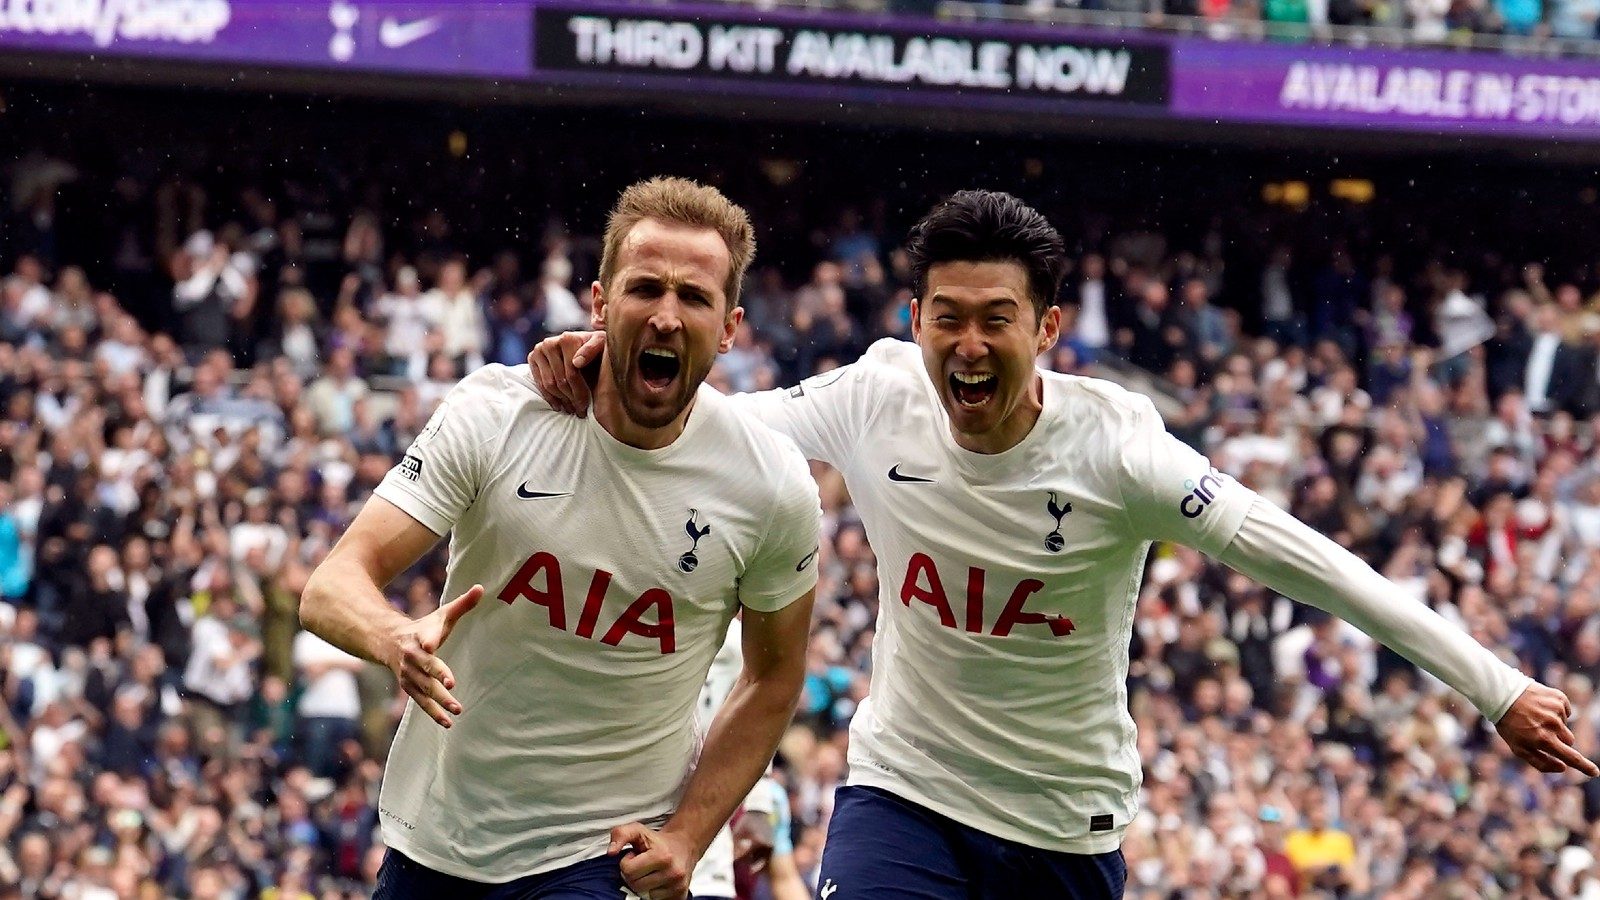 Tottenham Climb Above Arsenal Into 4th Place With Win Over Burnley